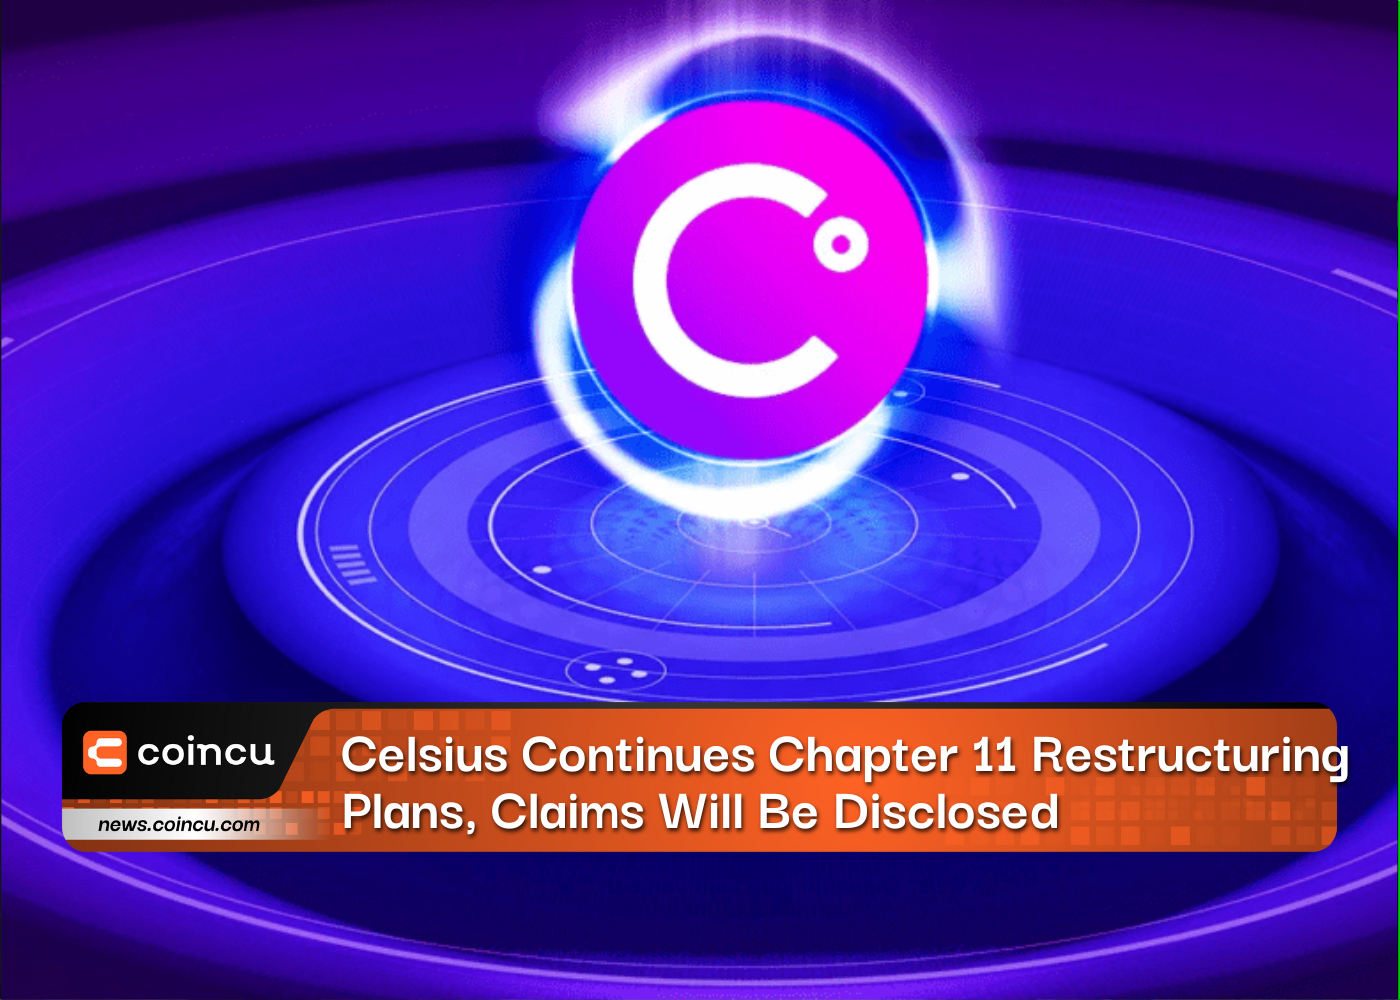 Celsius Continues Chapter 11 Restructuring Plans, Claims Will Be Disclosed